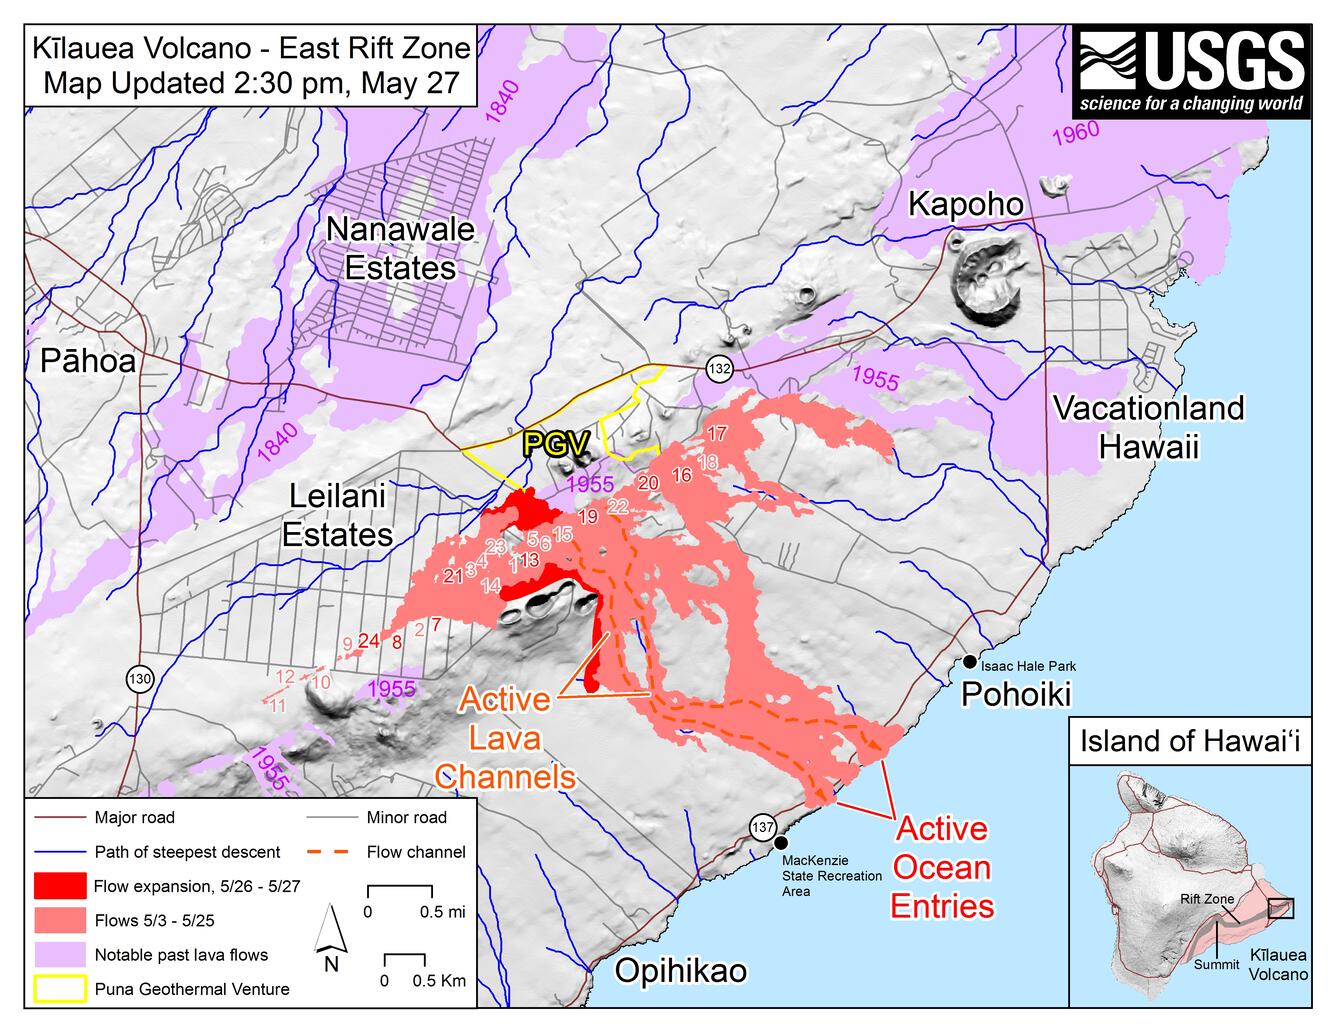 Kīlauea Lower East Rift Zone Fissures and Flows, May 26 at 3:00 p.m...